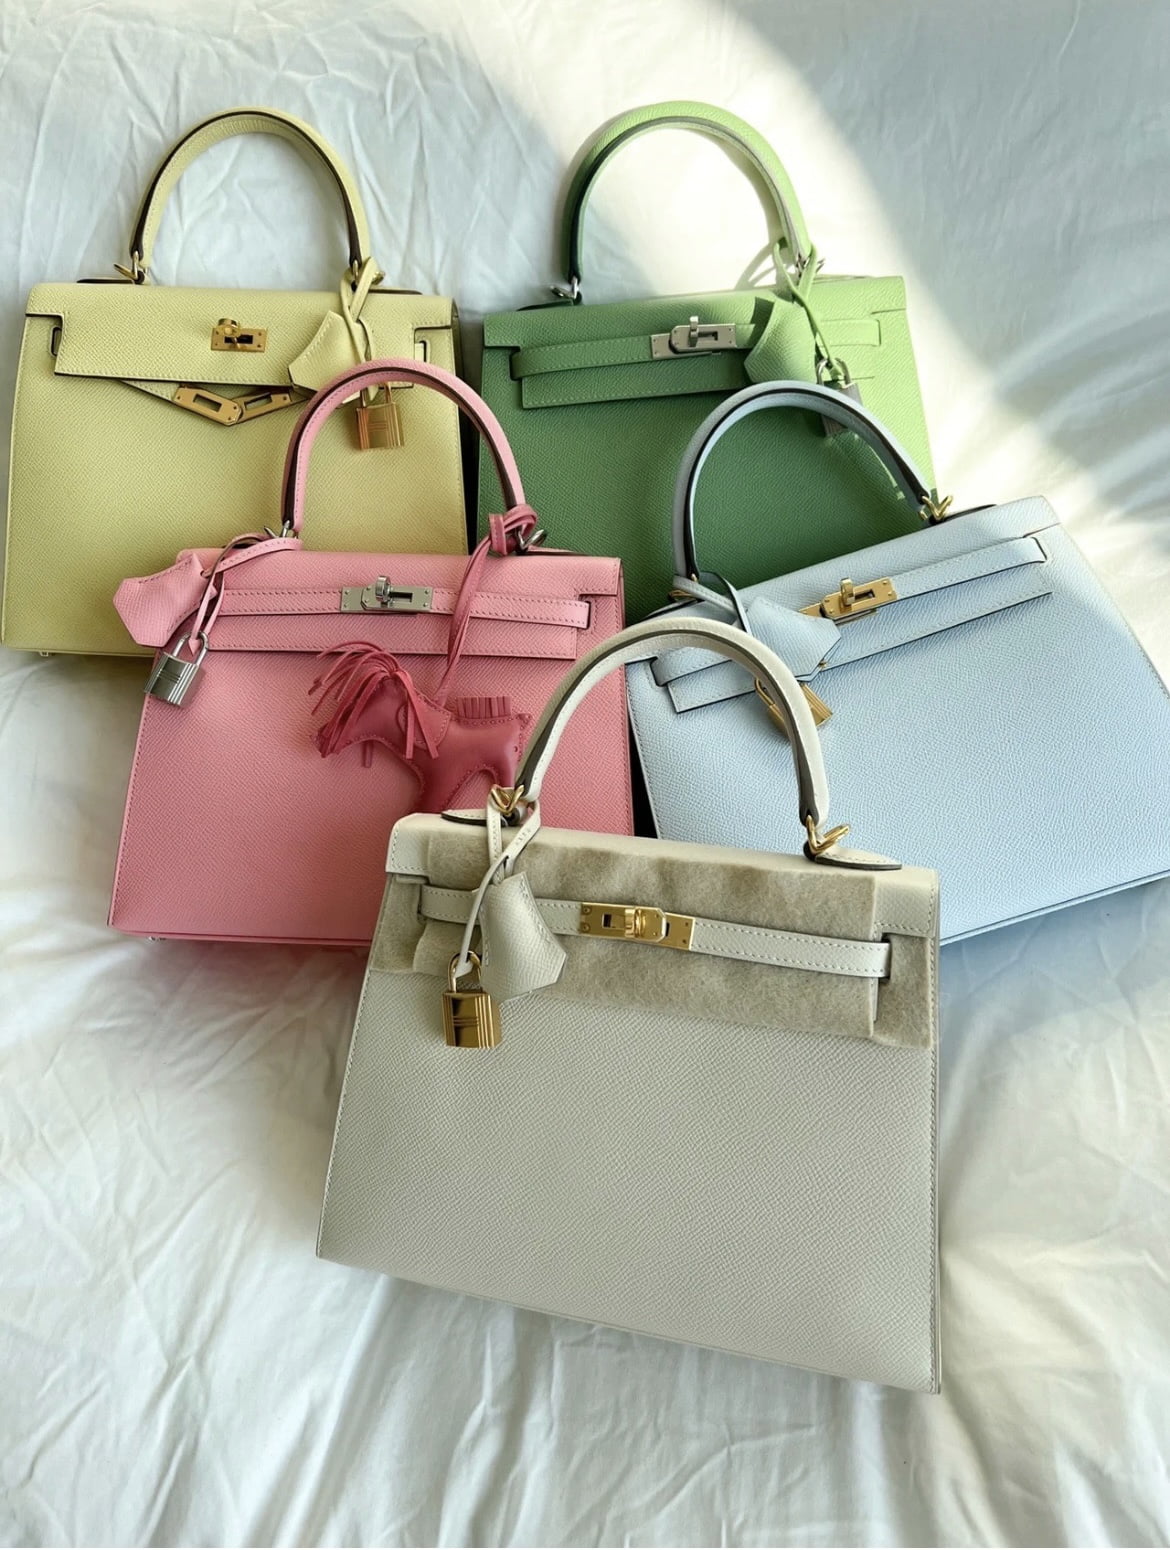 Truth About Hermes Bag Prices: Hermes Birkin, Mini Kelly, Non